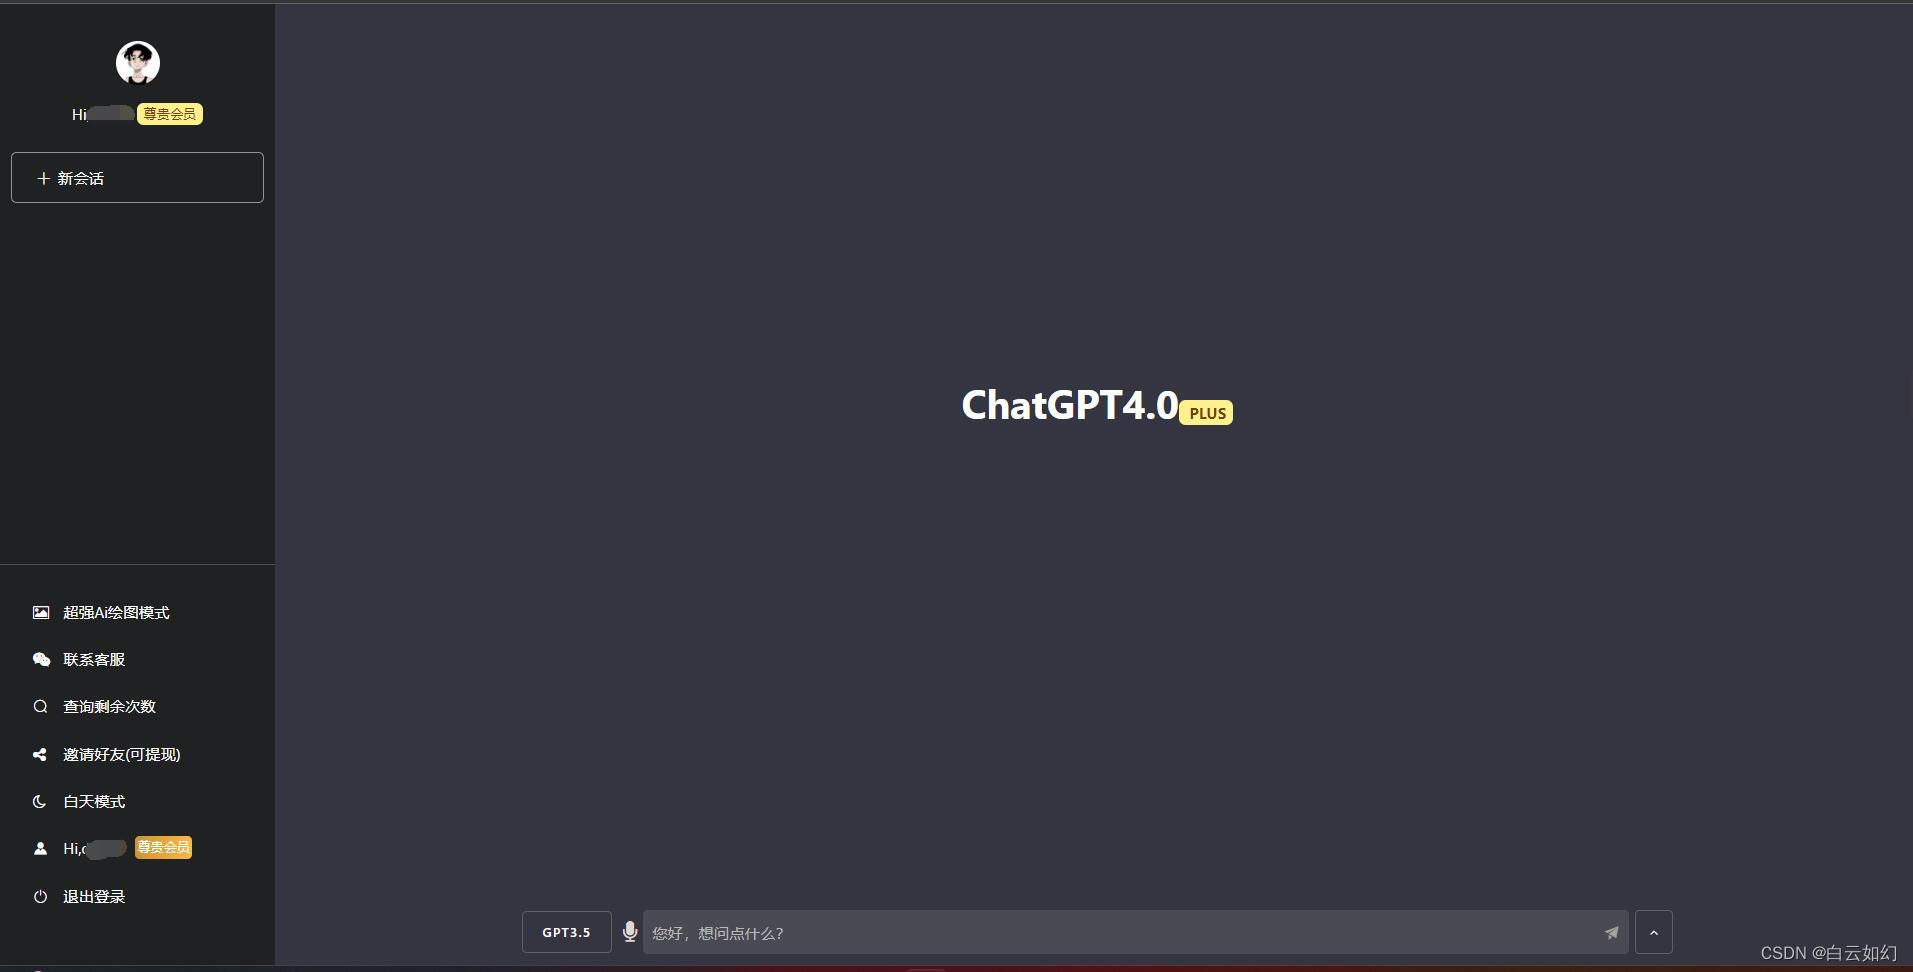 The latest ChatGPT website source code operating version